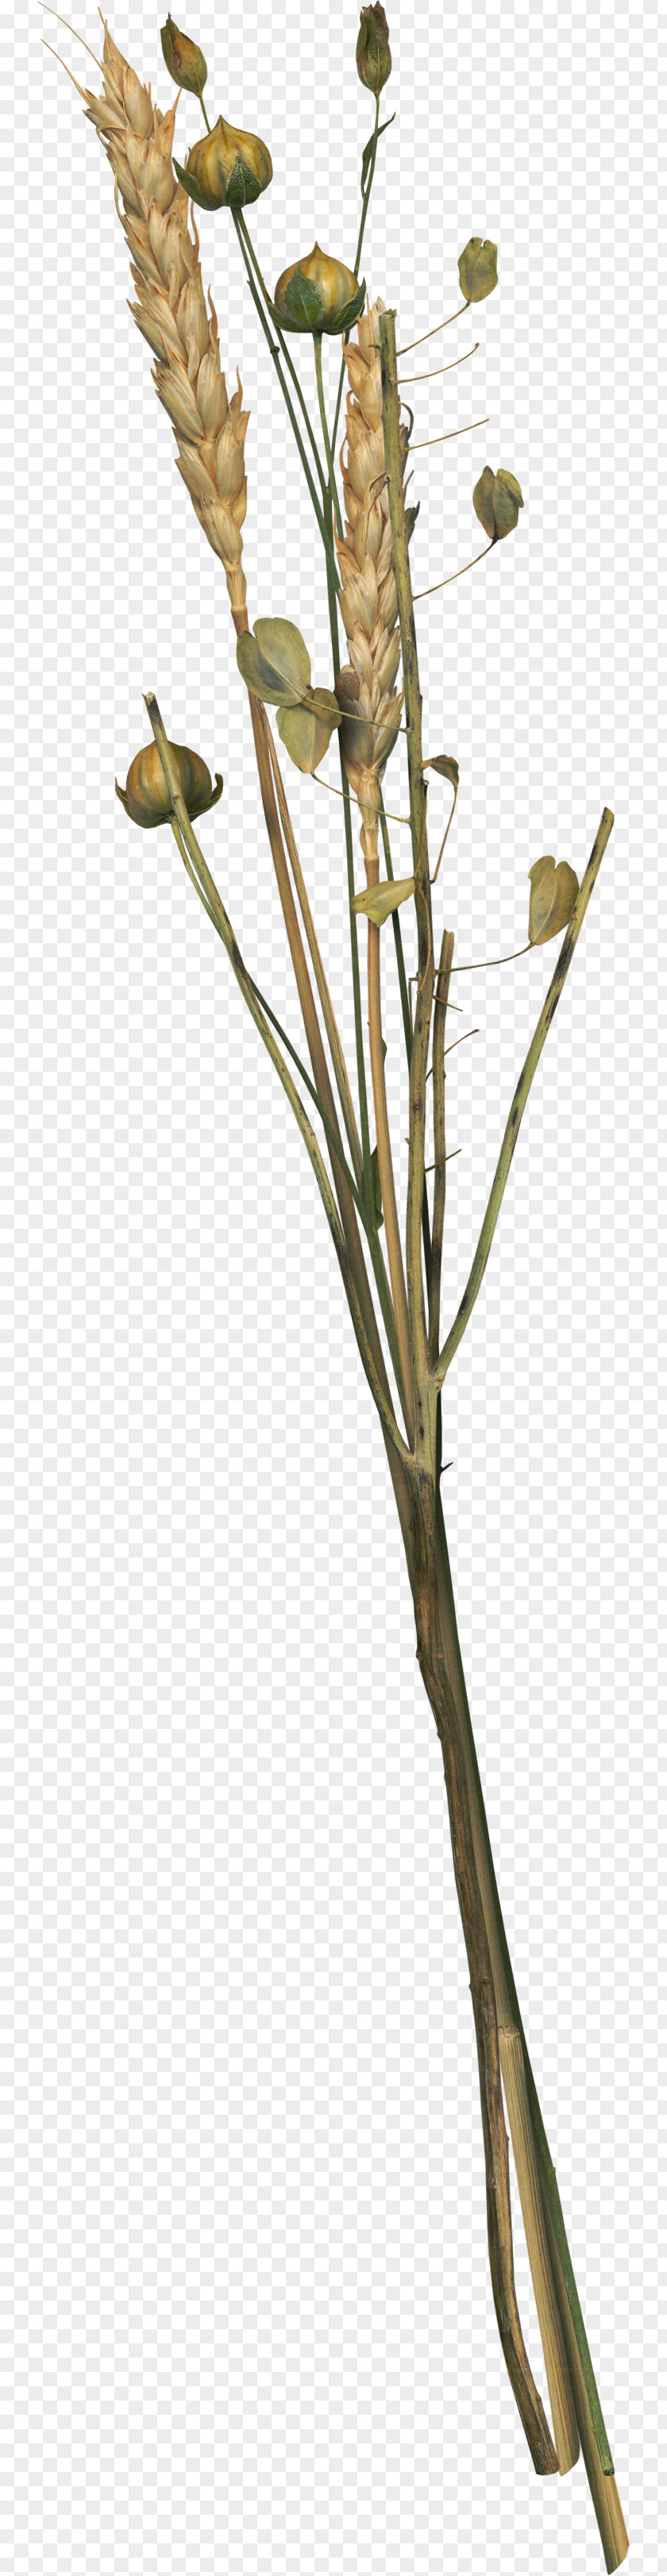 Wheat Flowers Flower PNG